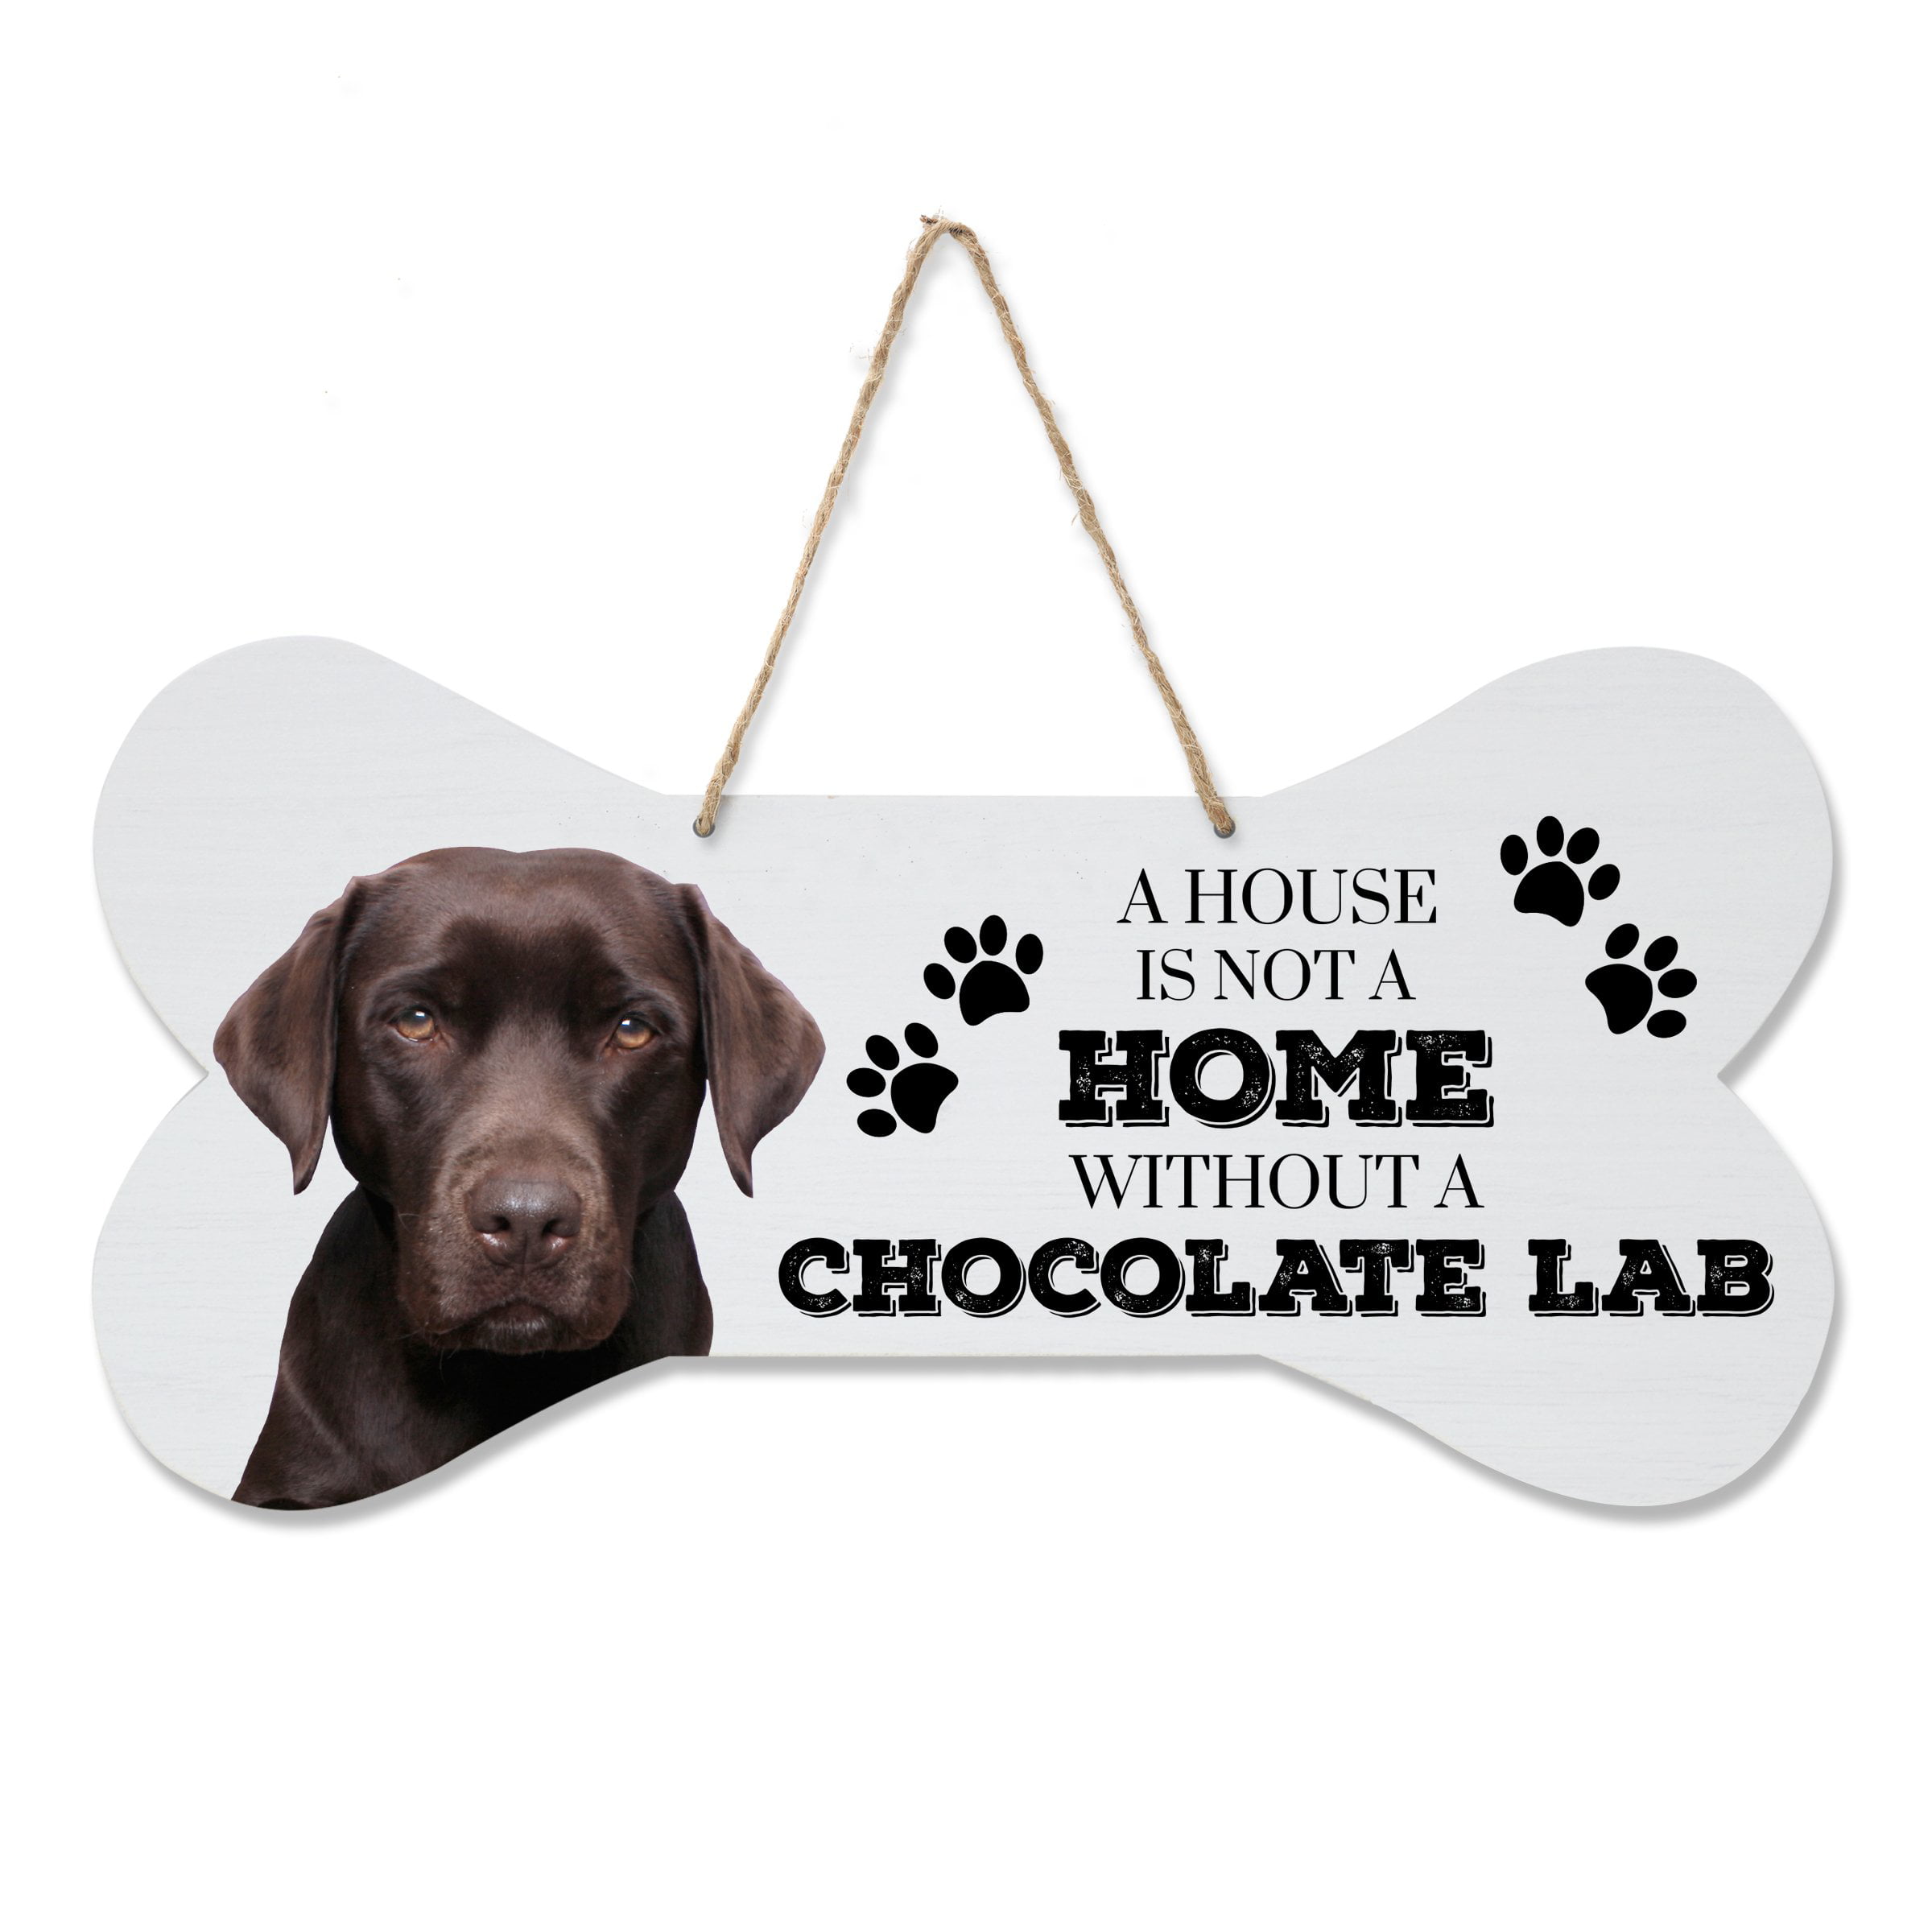 Chocolate Lab "A House is not a Home Without a Chocolate Lab" 10" x 5" Dog Sign